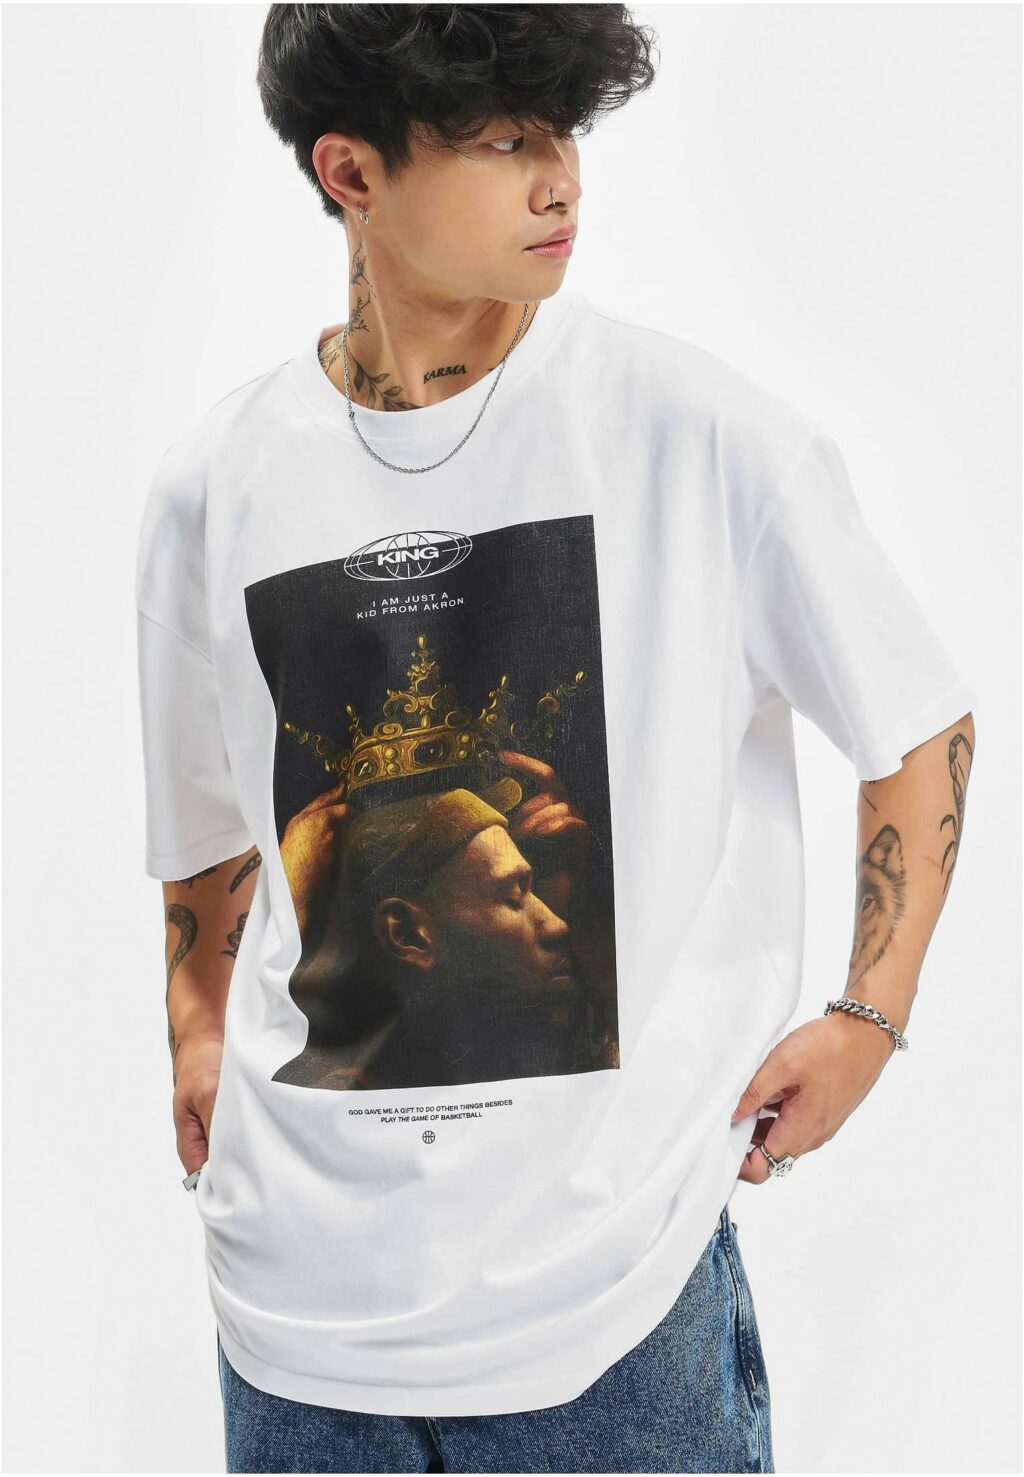 Kid from Akron Oversize Tee white MT1895